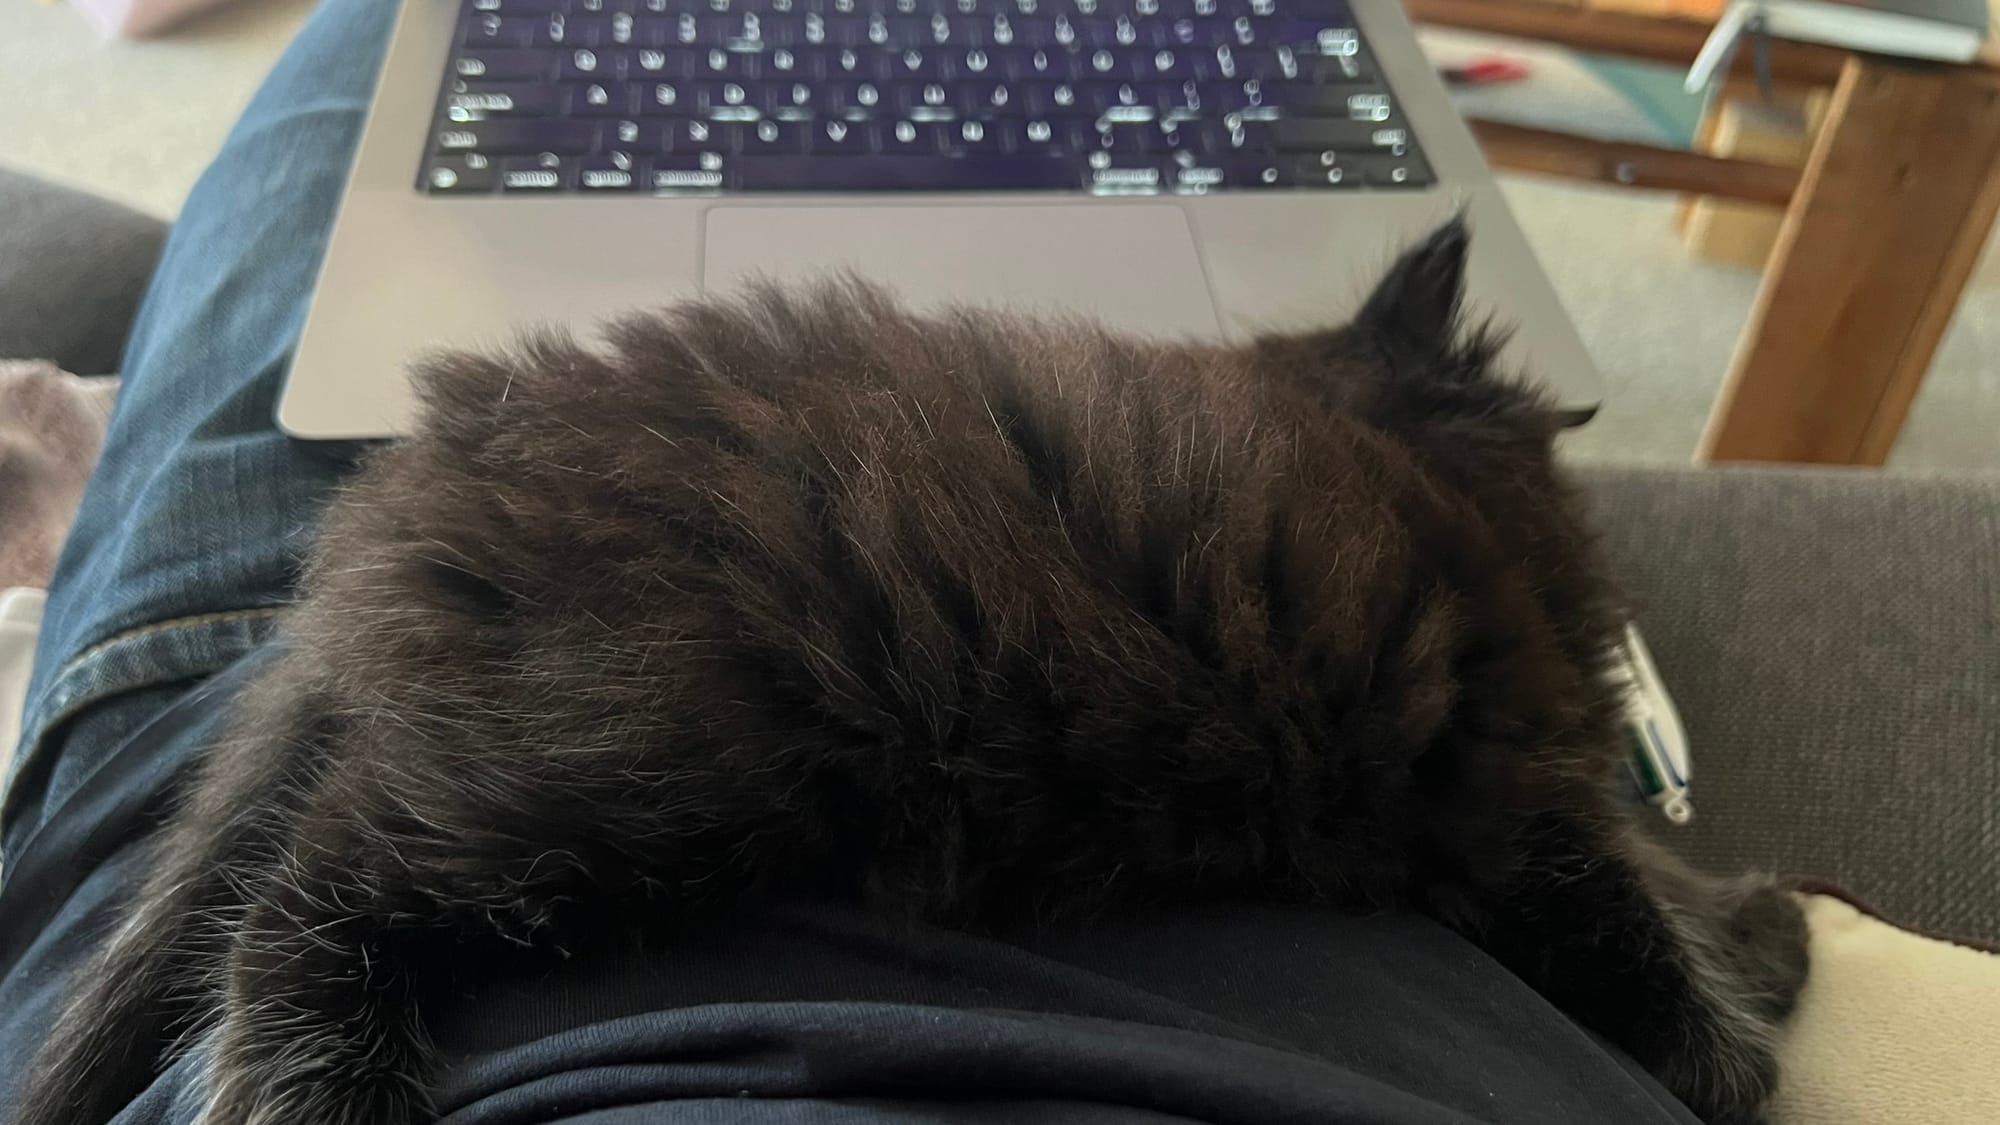 A tiny black fluffy kitten on a lap with a laptop behind it. 